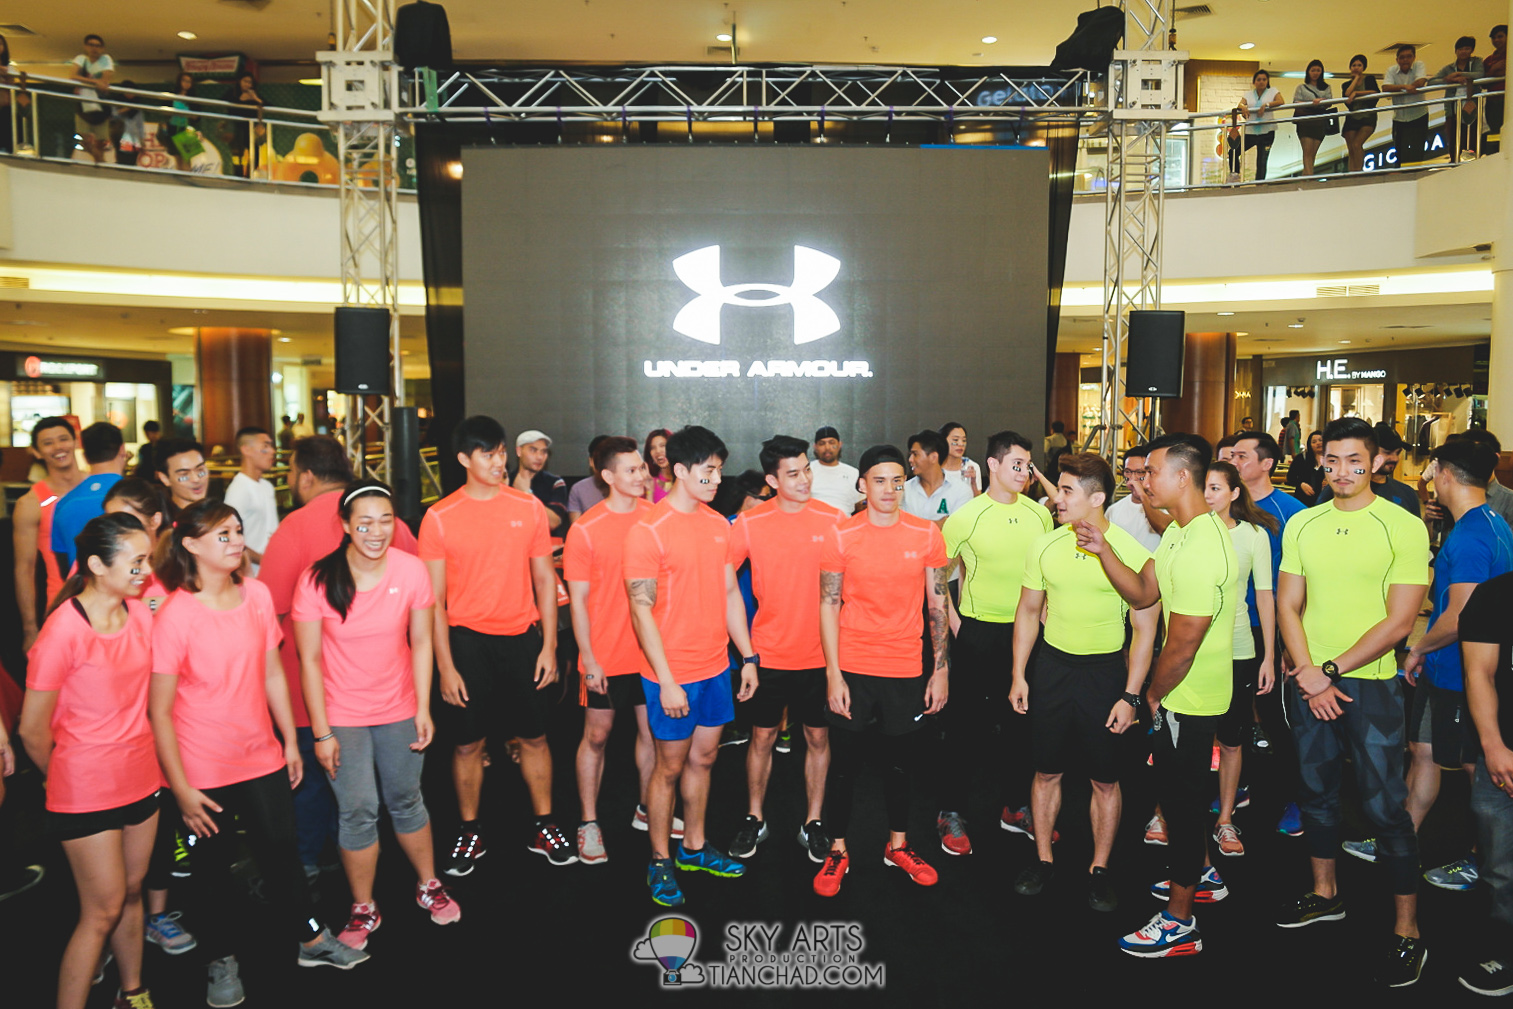 Under armour mid valley